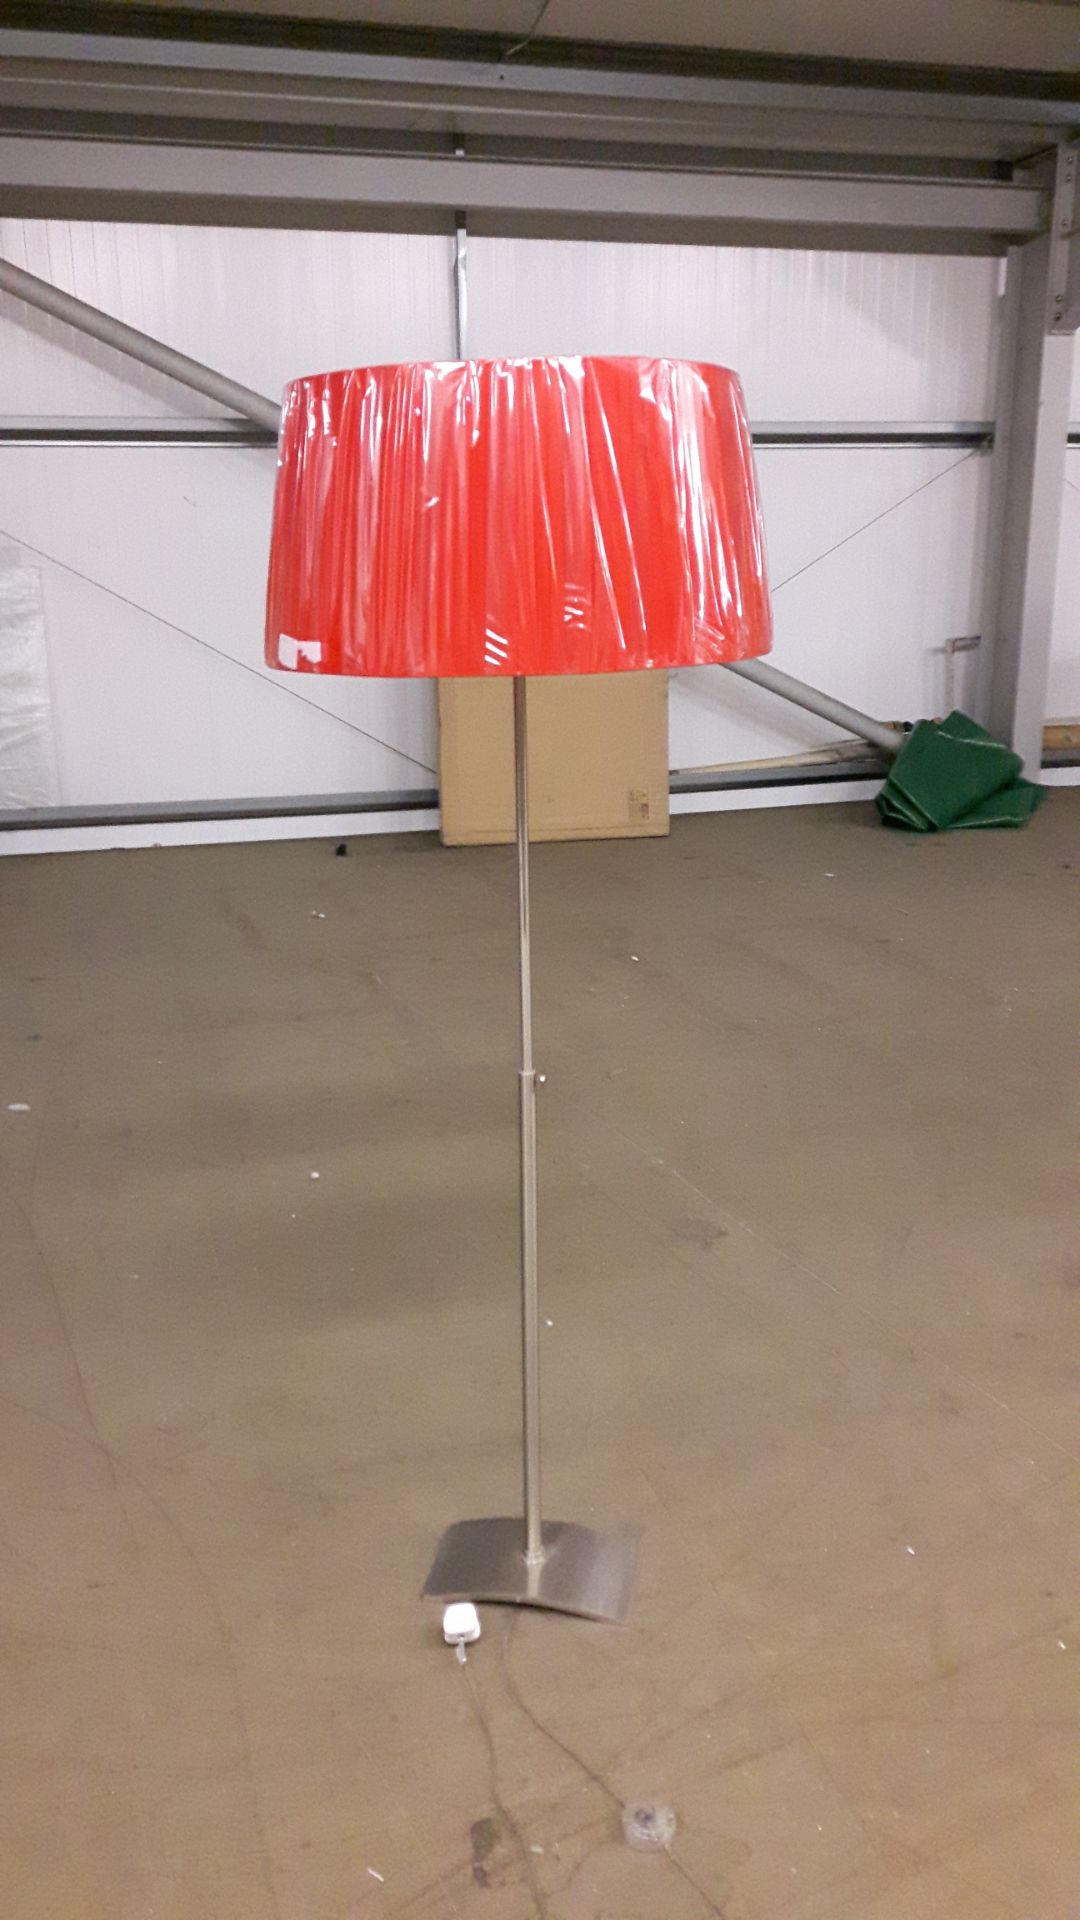 Adjustable stainless steel Floor Lamp with new red shade.